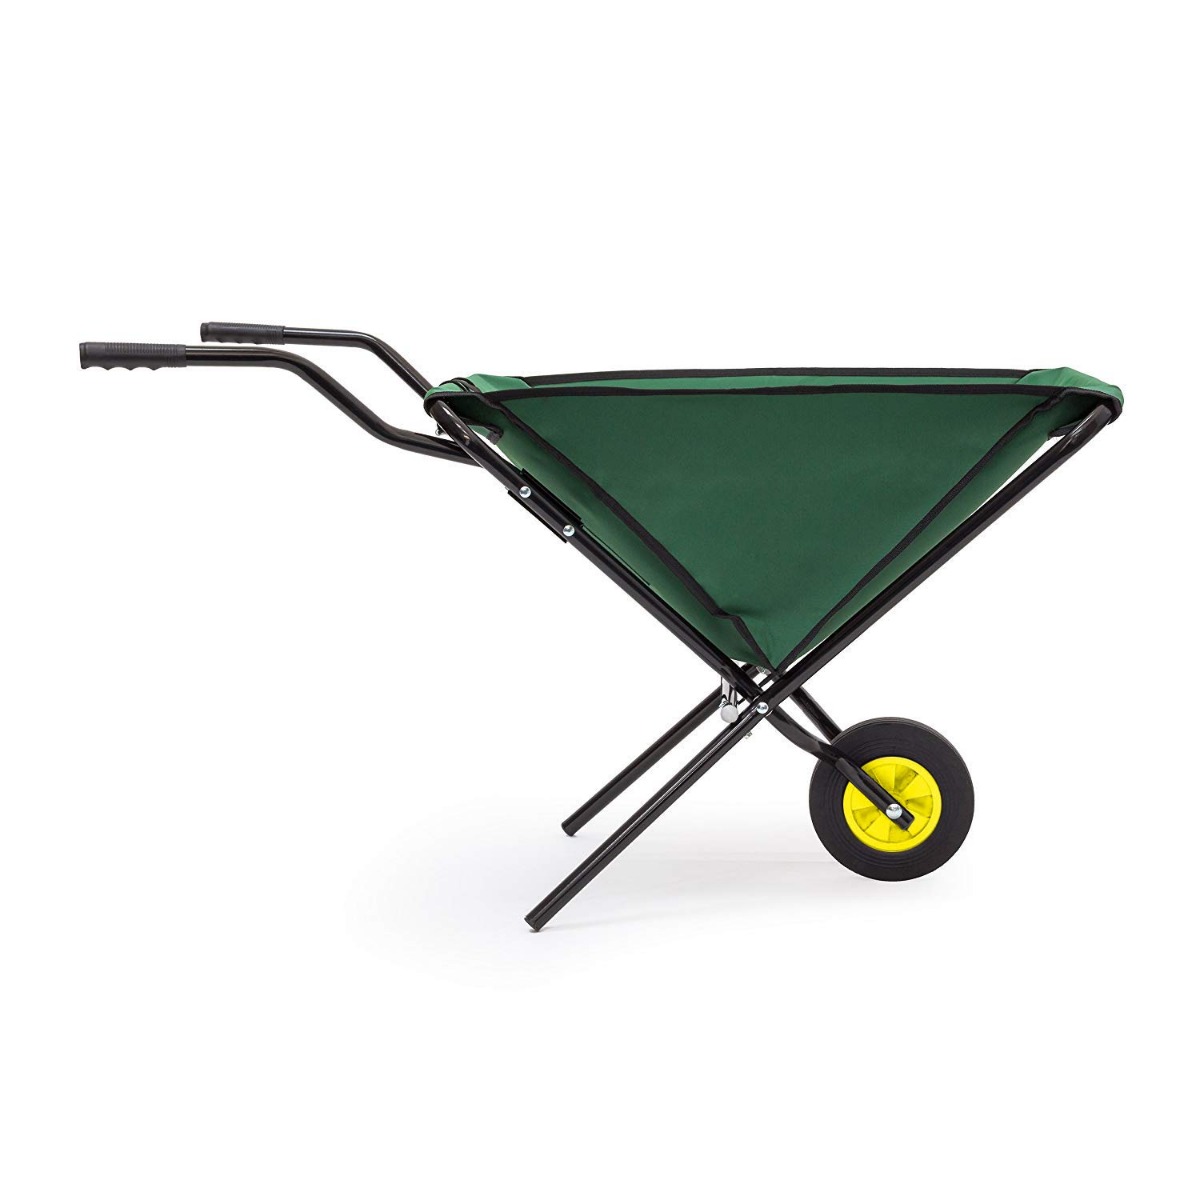 Green Foldable Wheelbarrow 66x64x112cm – 26x25x44in – Steel with Strong Polyester Space-Saving Garden Cart Gardening Wheelbarrow Holds up to 30 kg (60lbs) -7478